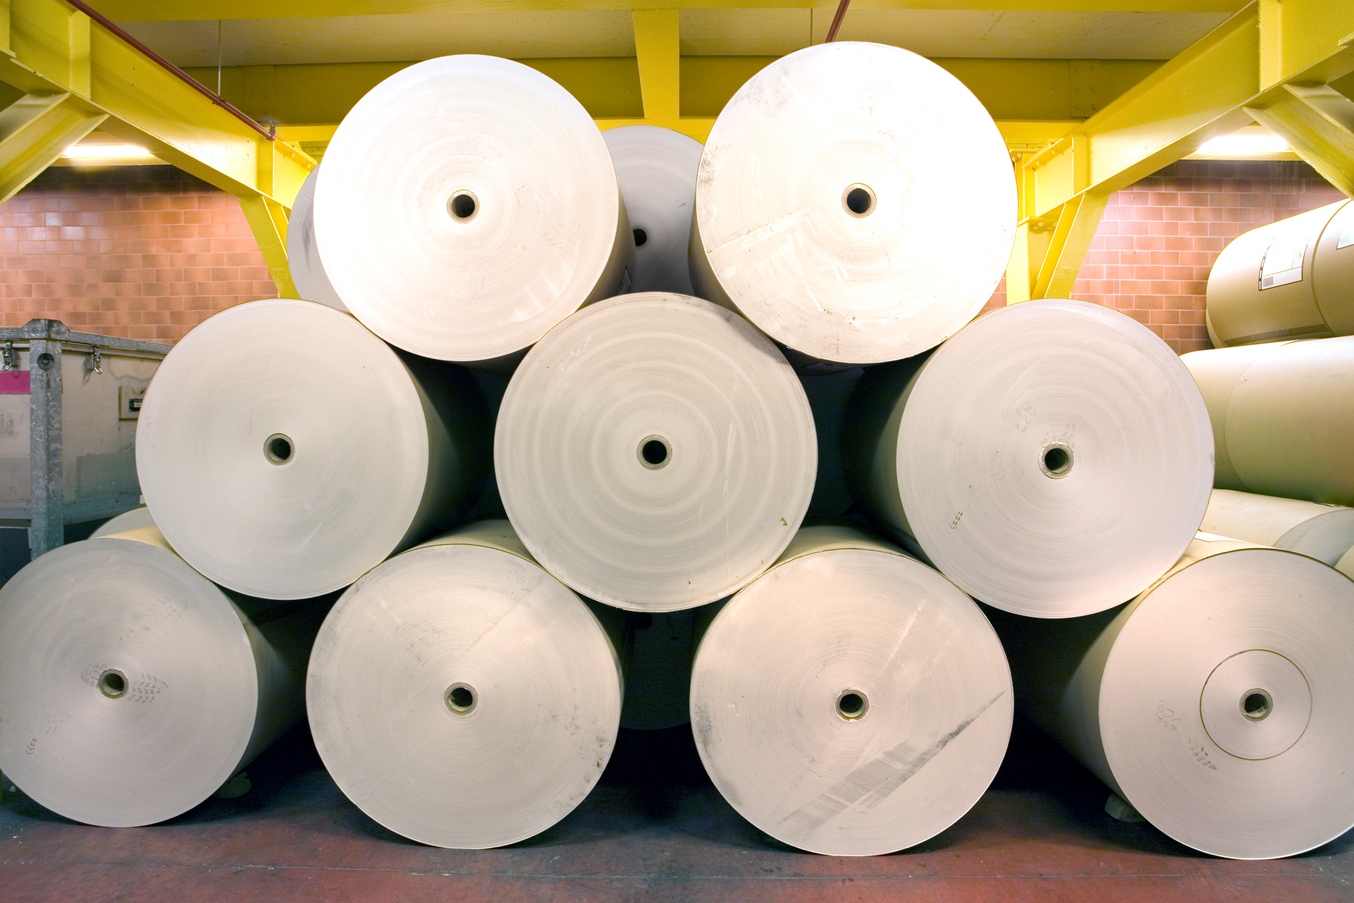 Spools of paper in a consumer goods factory.